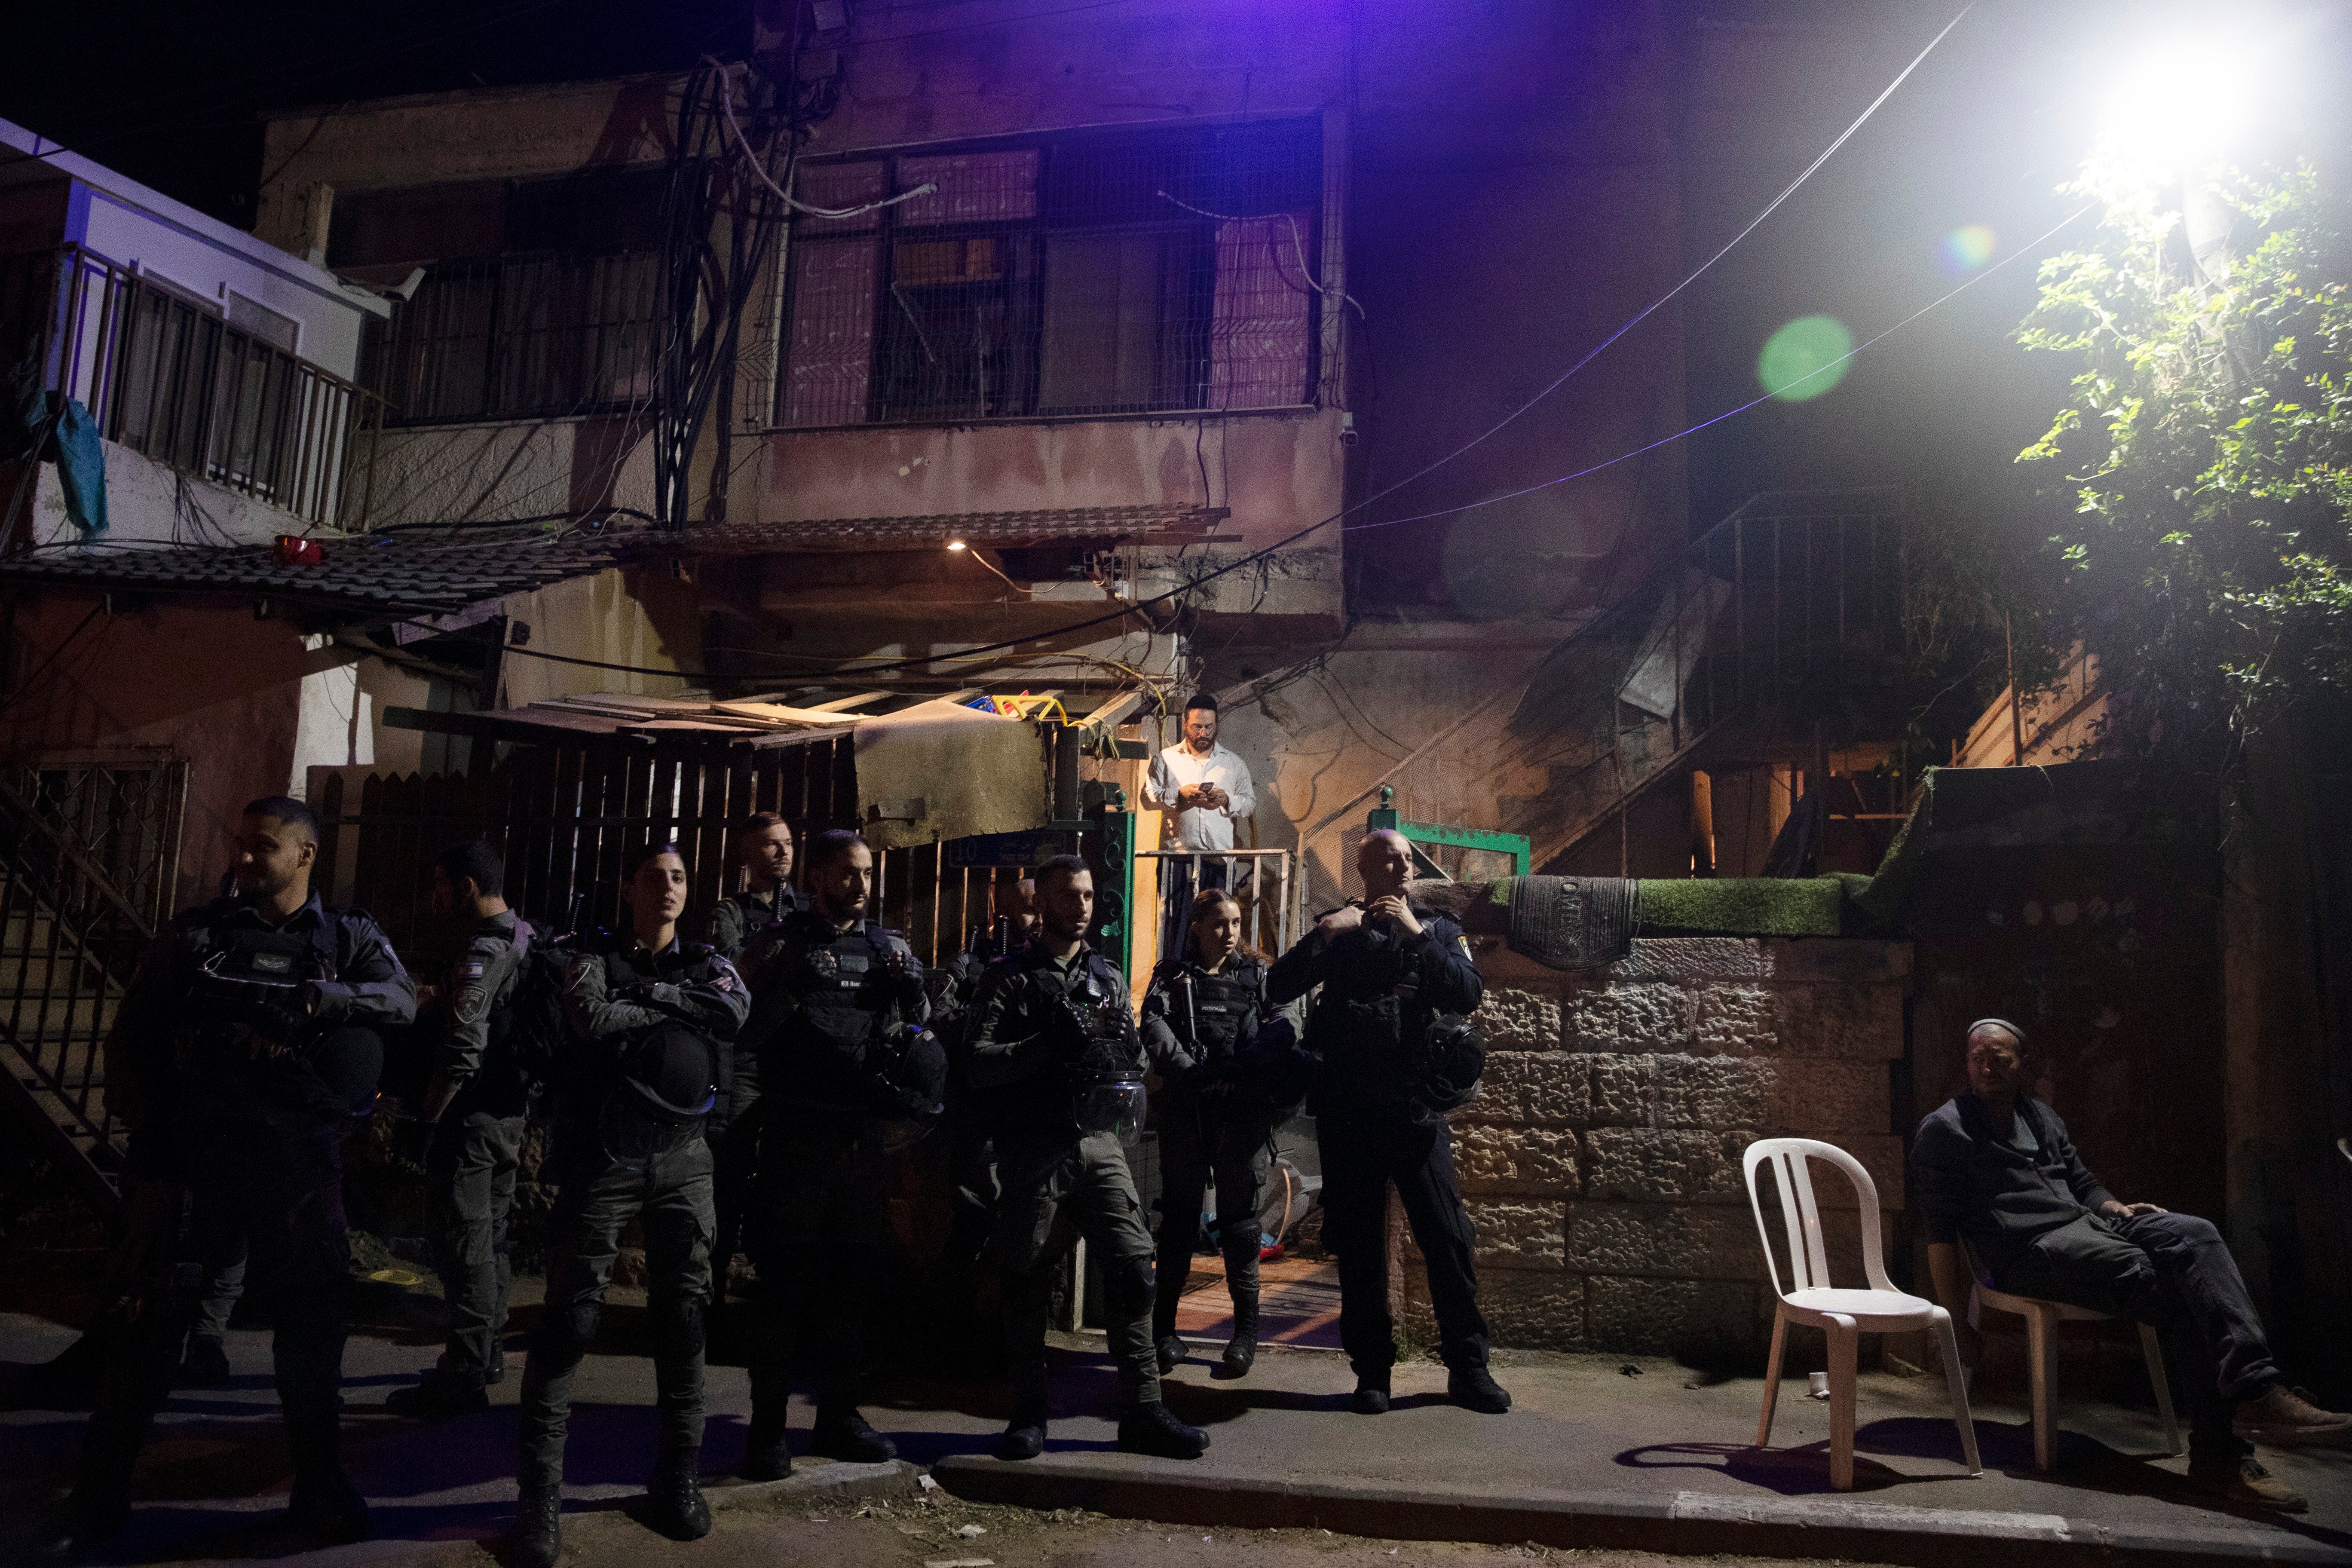 Israeli police stand guard in front of a Palestinian home in the Sheikh Jarrah neighbourhood